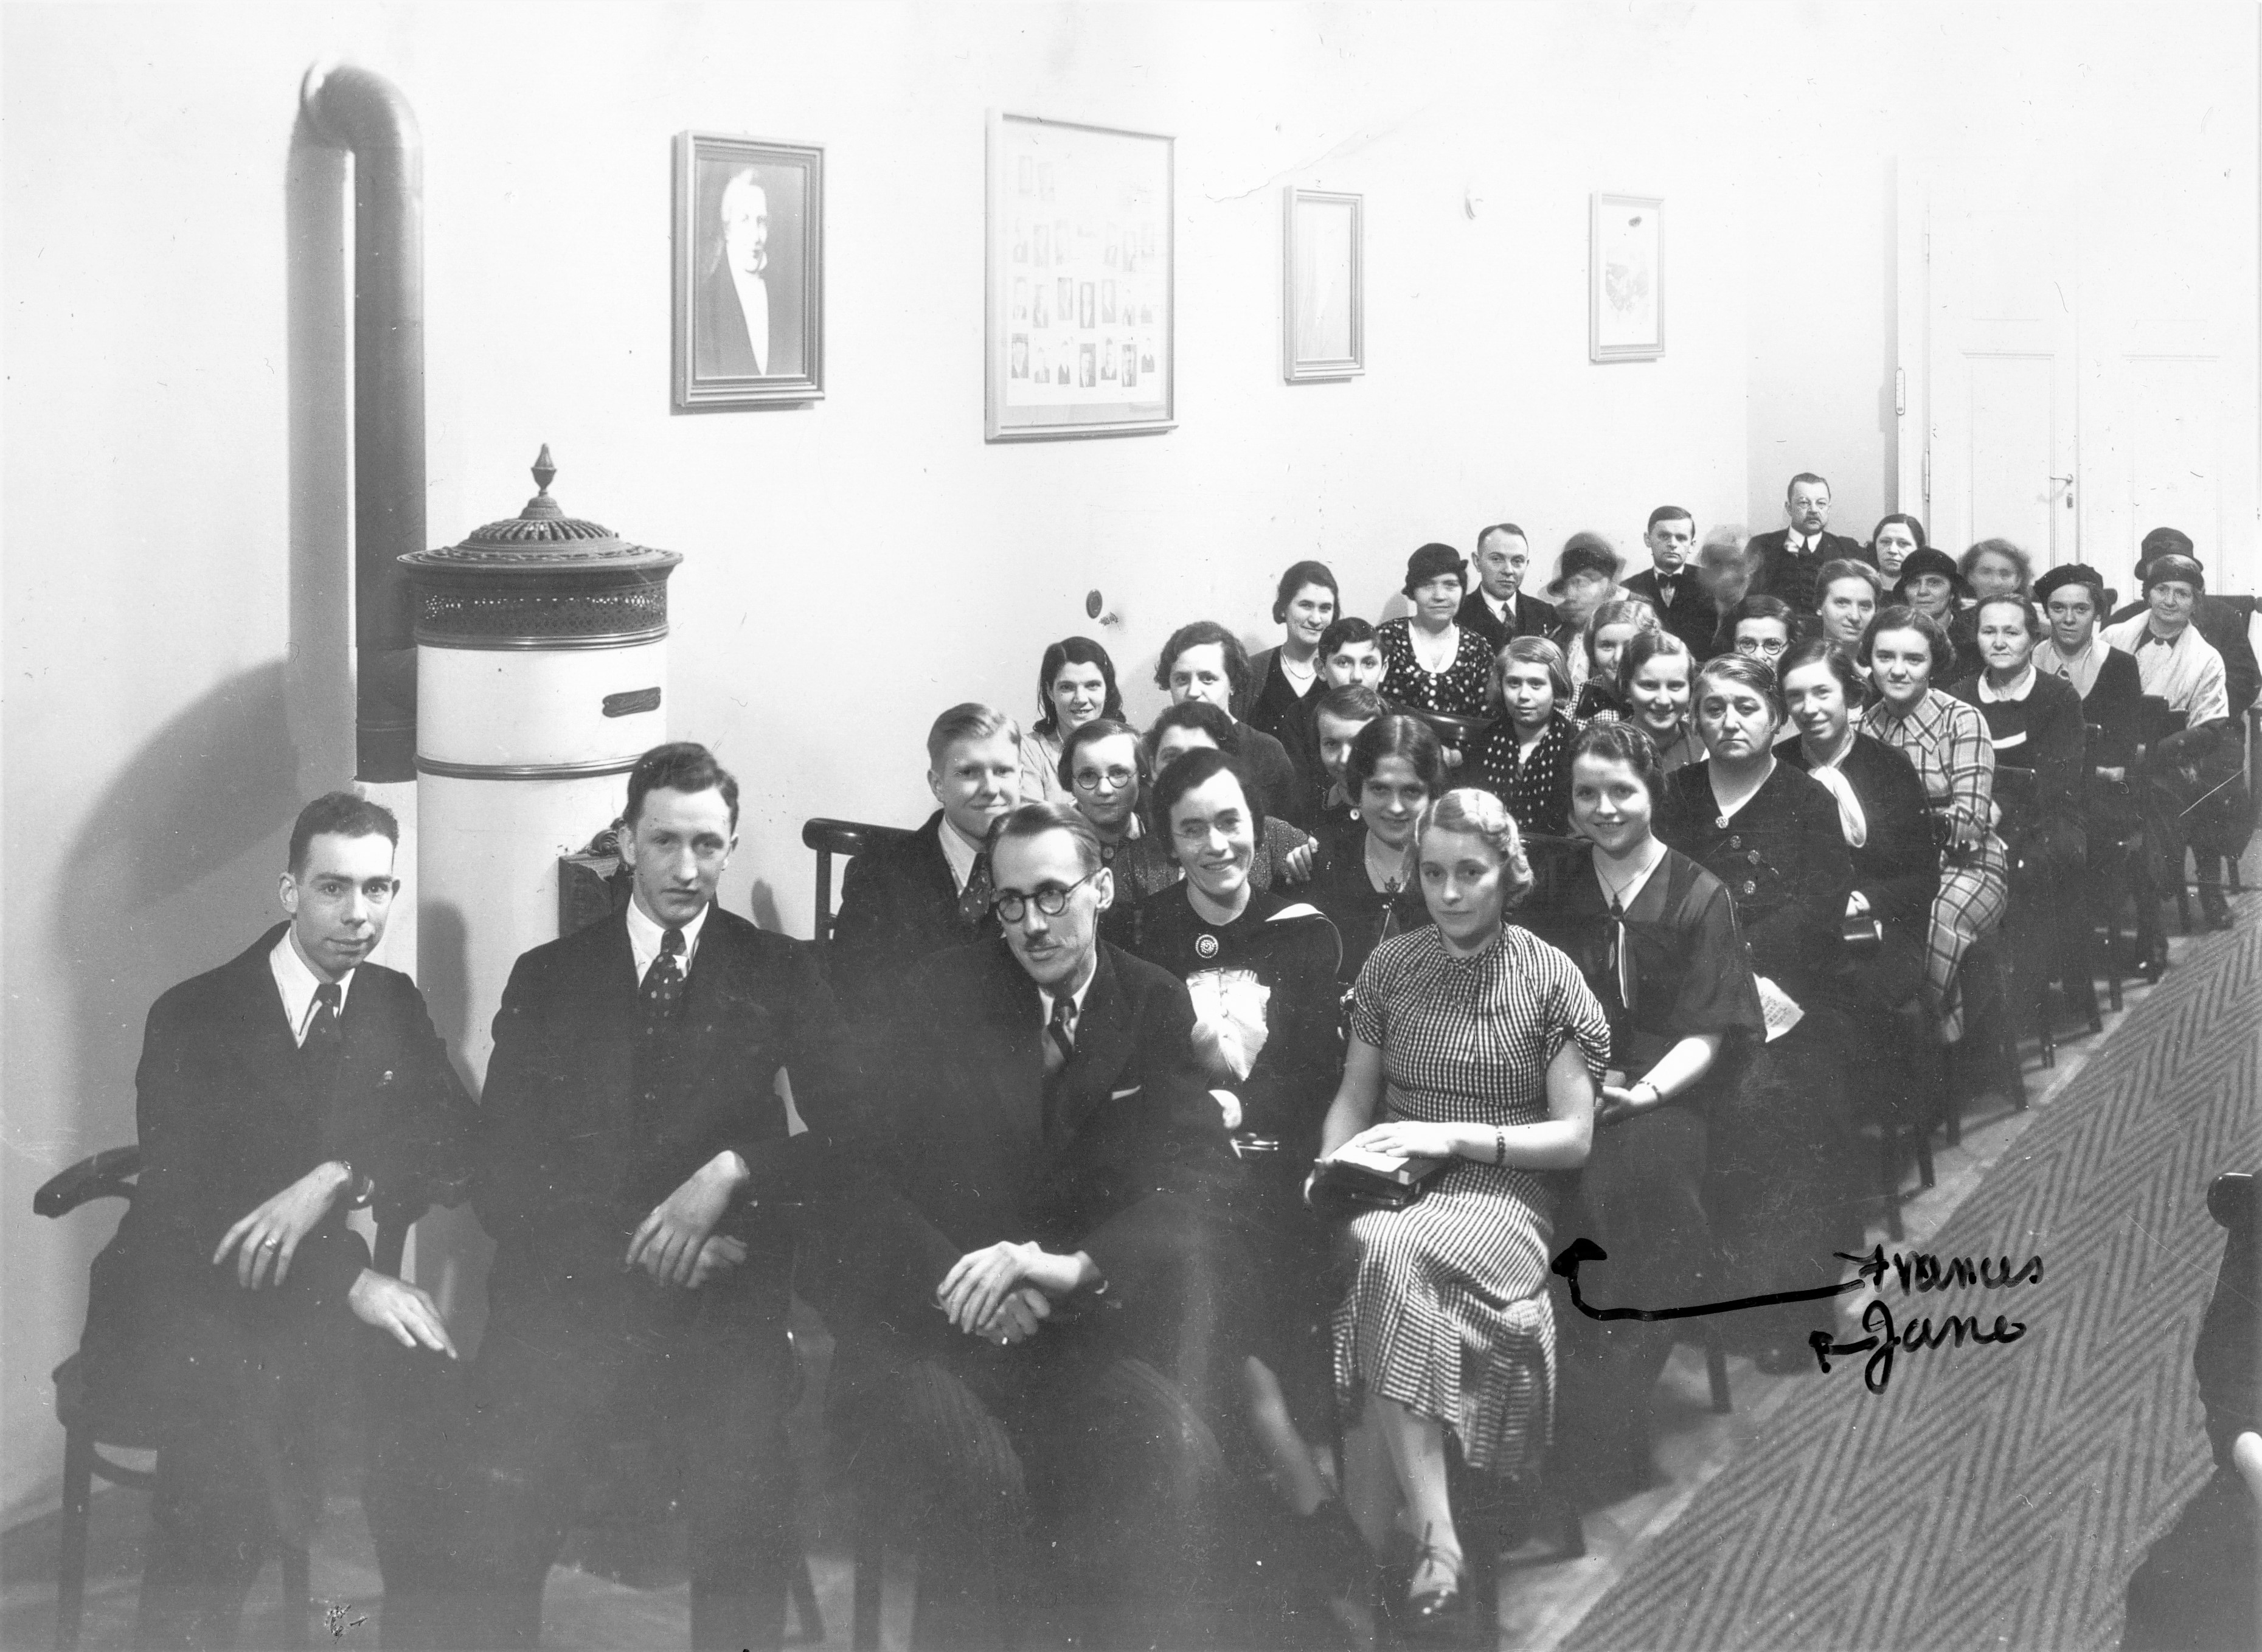 Meeting Place in Czecheslovak Mission, Circa 1934